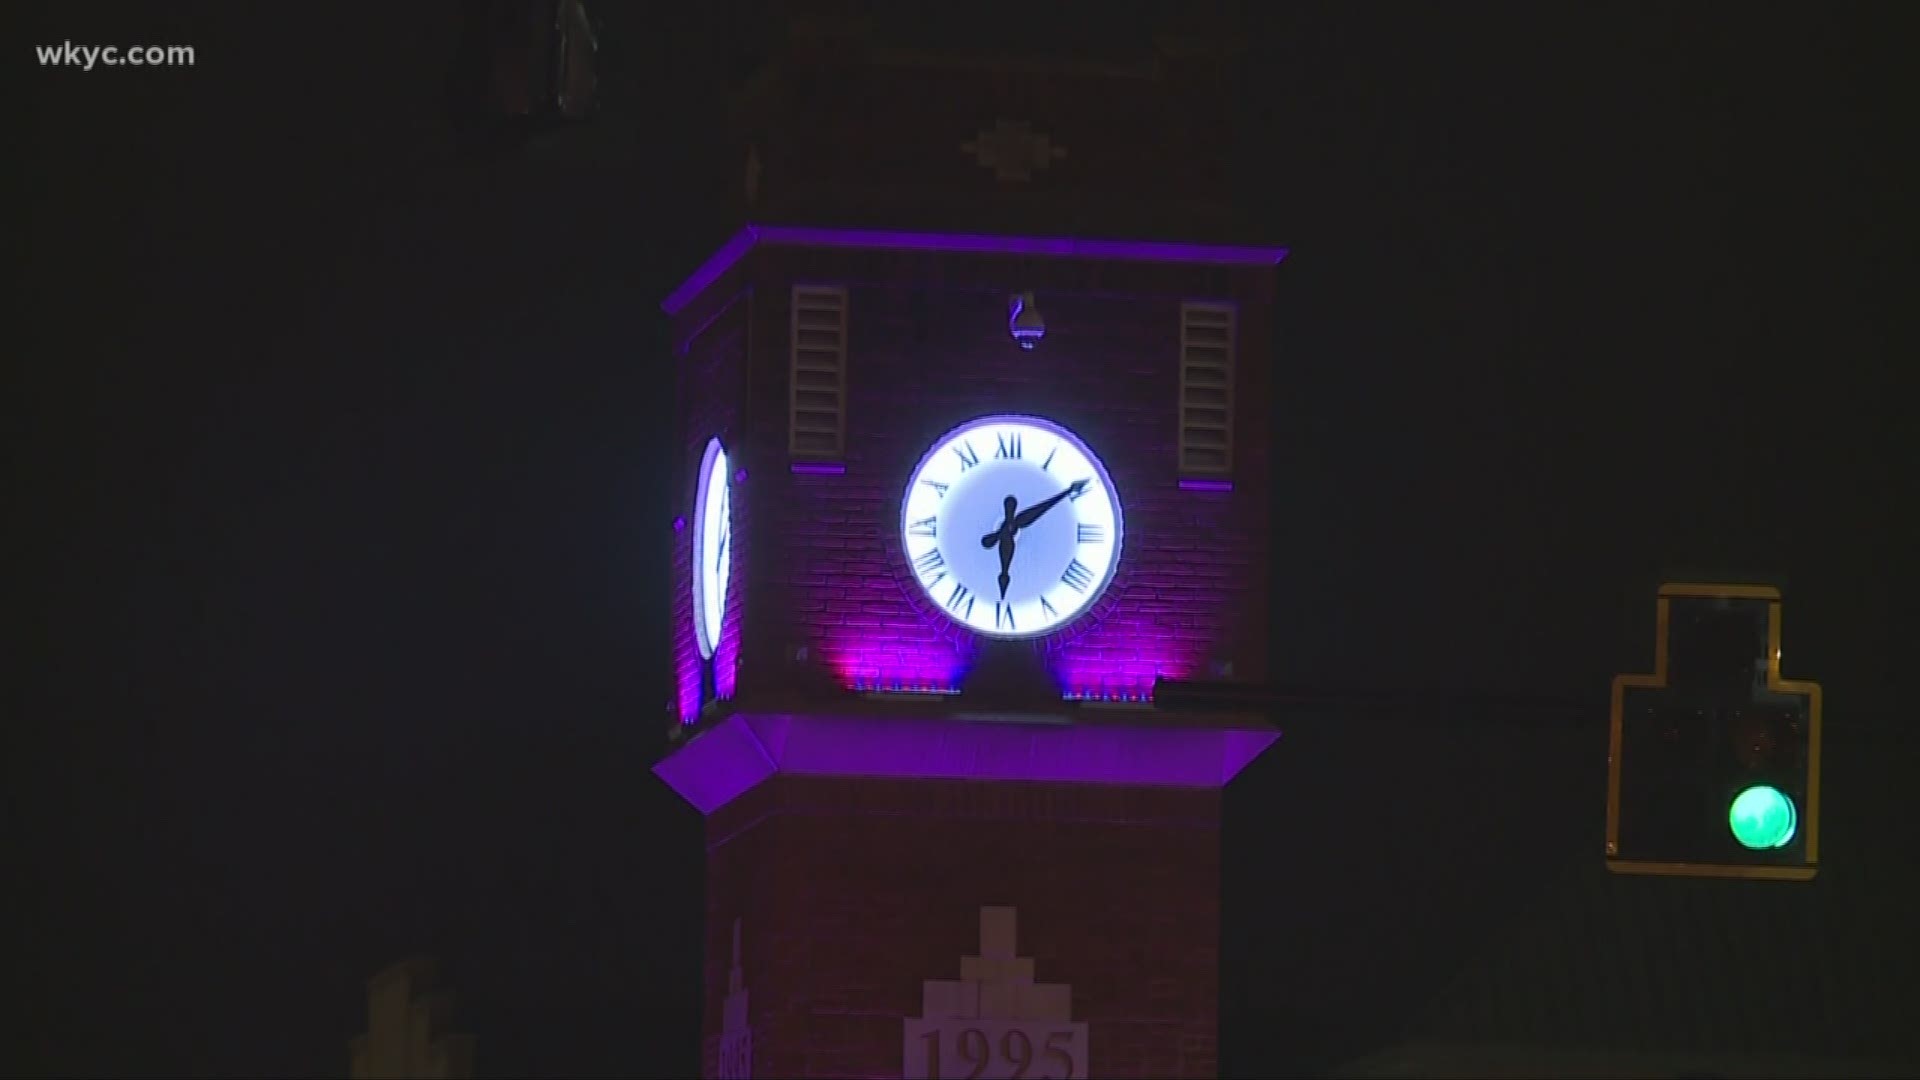 In honor of World Pancreatic Cancer Day, Cuyahoga Falls is using purple lighting to raise awareness downtown. “If we help one person this is all worth it."